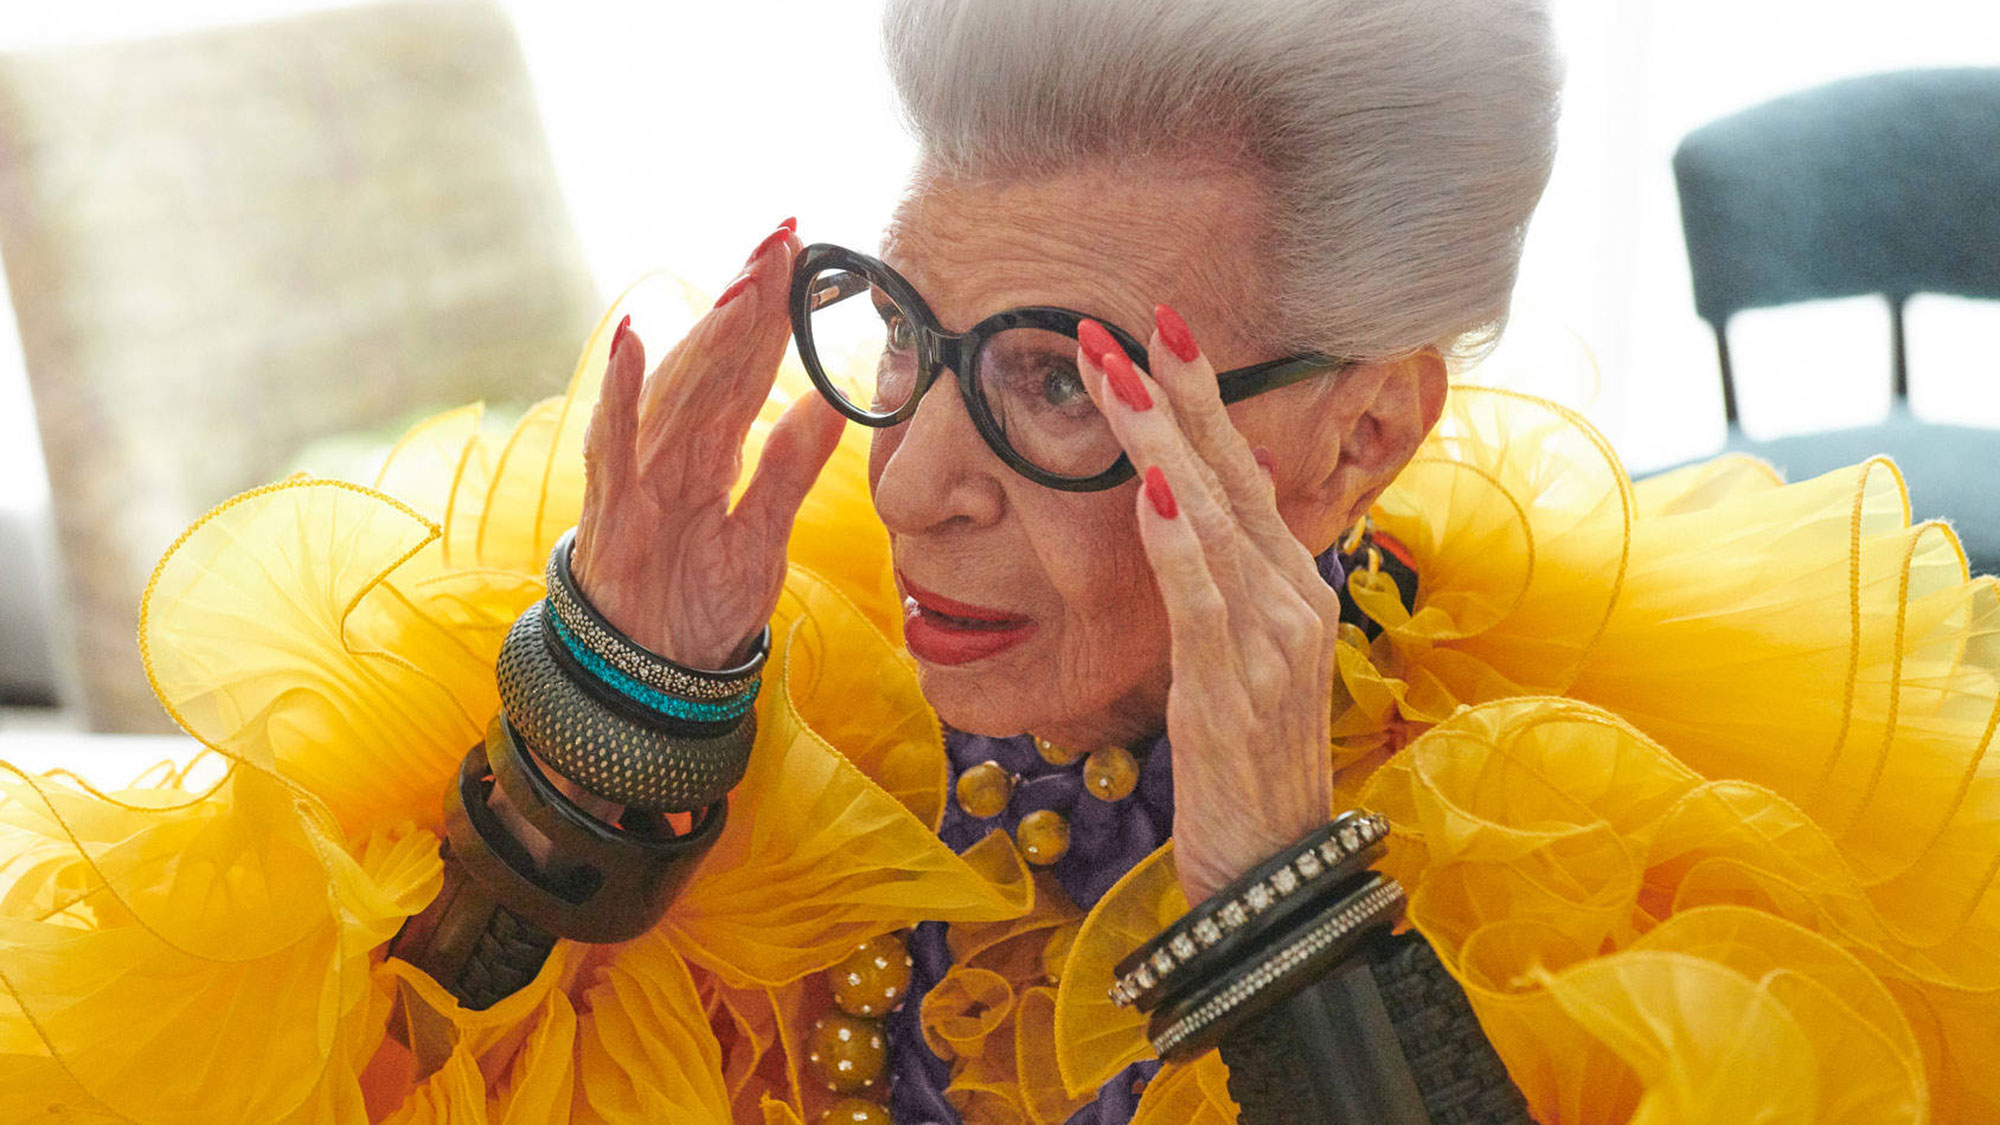 The Iris Apfel x H&M collection is launching tomorrow and here’s what I’m buying